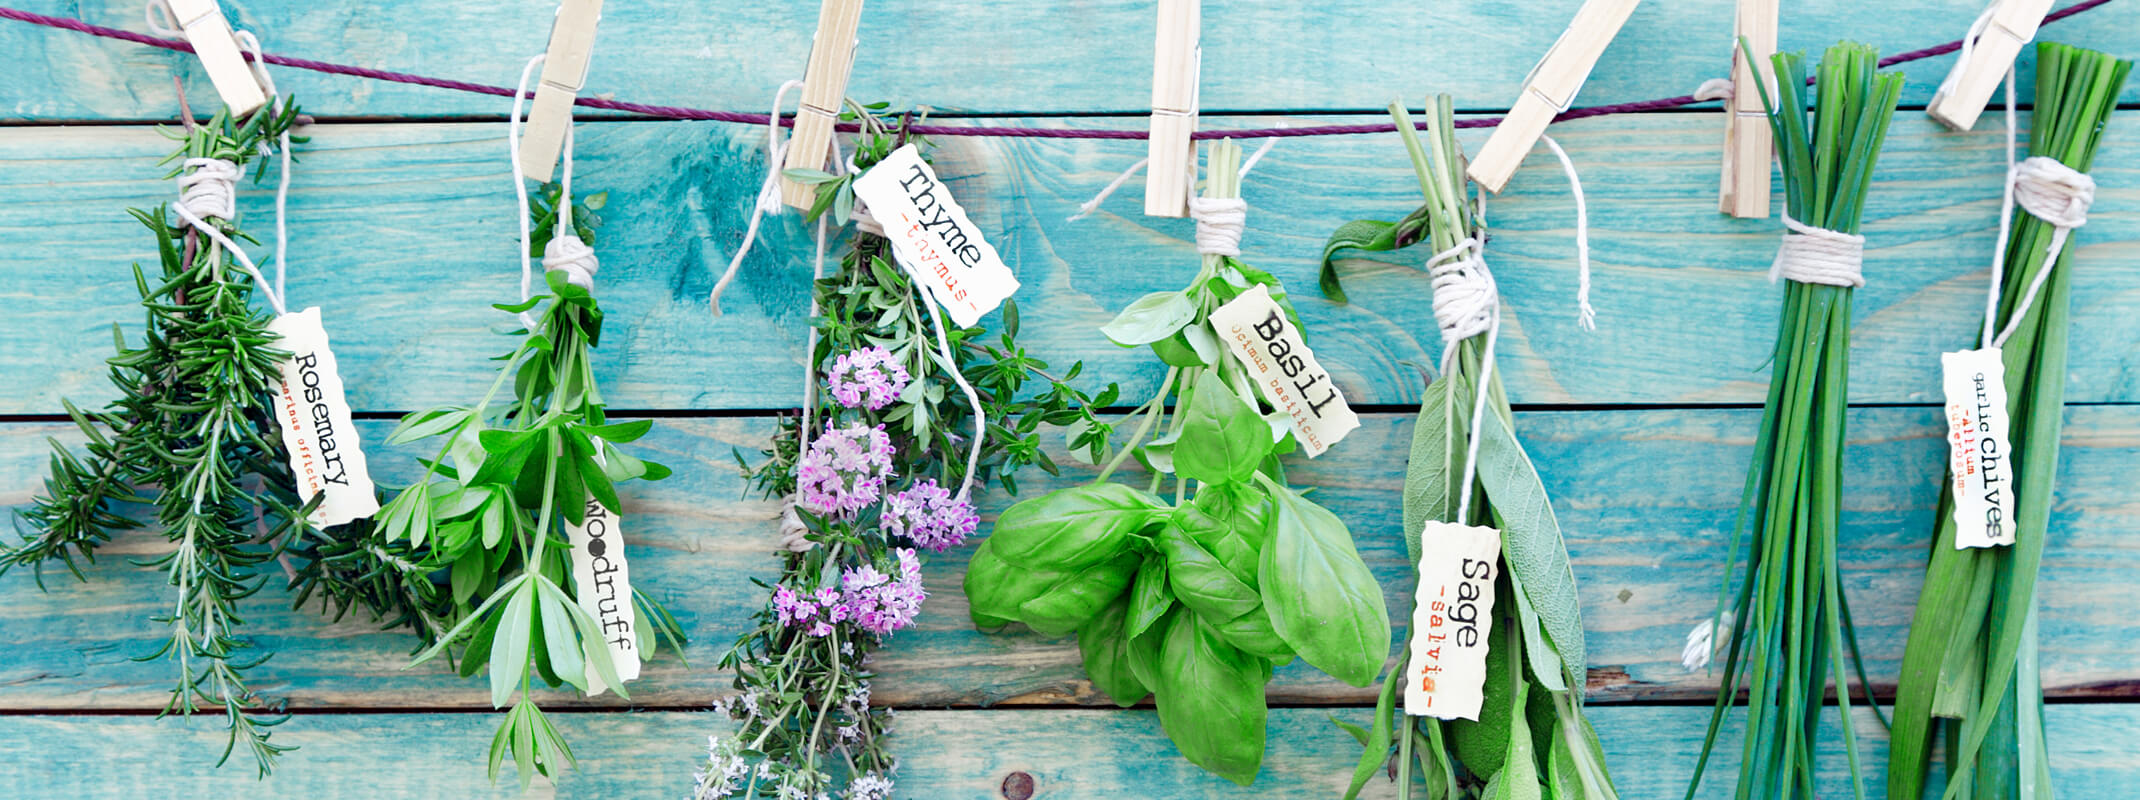 Assorted herbs Hanging in front of a blue wooden wall with identification tags